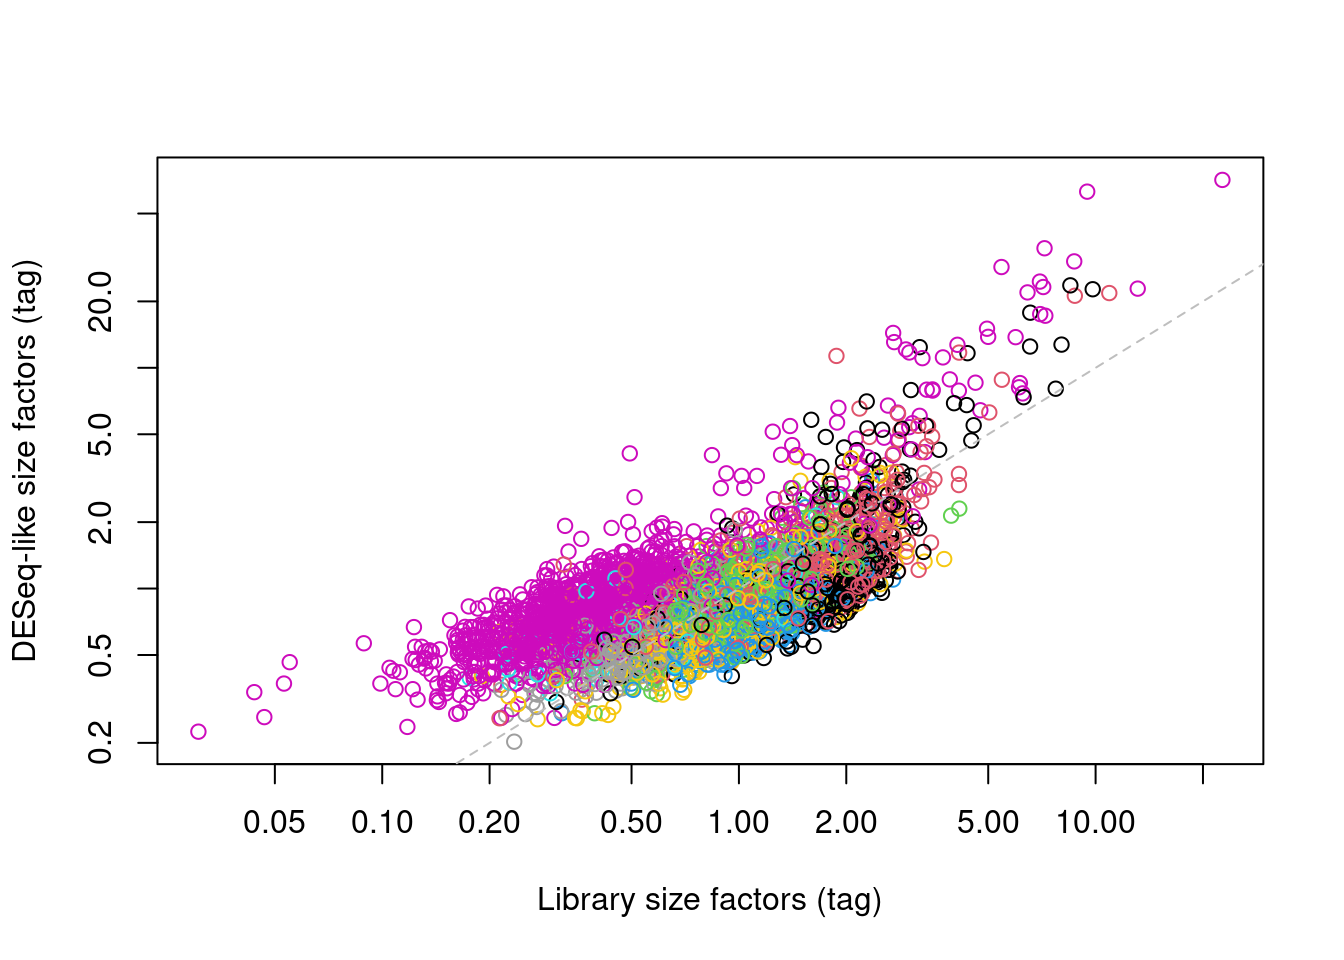 DESeq-like size factors for each cell in the PBMC dataset, compared to ADT library size factors. Each point is a cell and is colored according to the cluster identity defined from normalized ADT data.